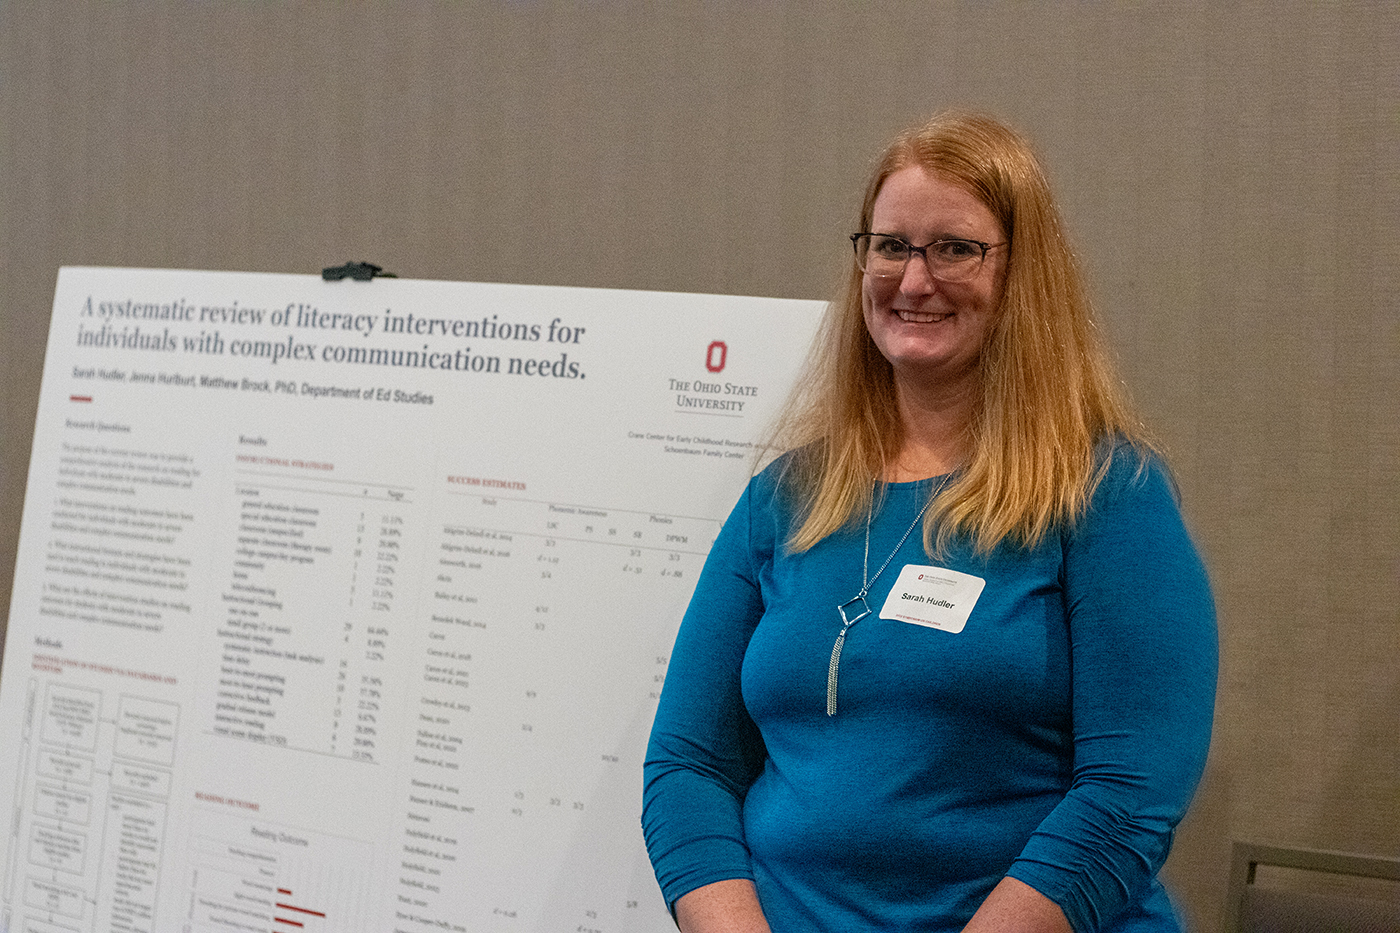 Sarah Hudler, a graduate research associate at Ohio State's Crane Center for Early Childhood Research and Policy, stands next to a poster presenting research she conducted on literary interventions for individuals with complex communication needs. The poster was displayed at the 2023 Crane Symposium on Children.